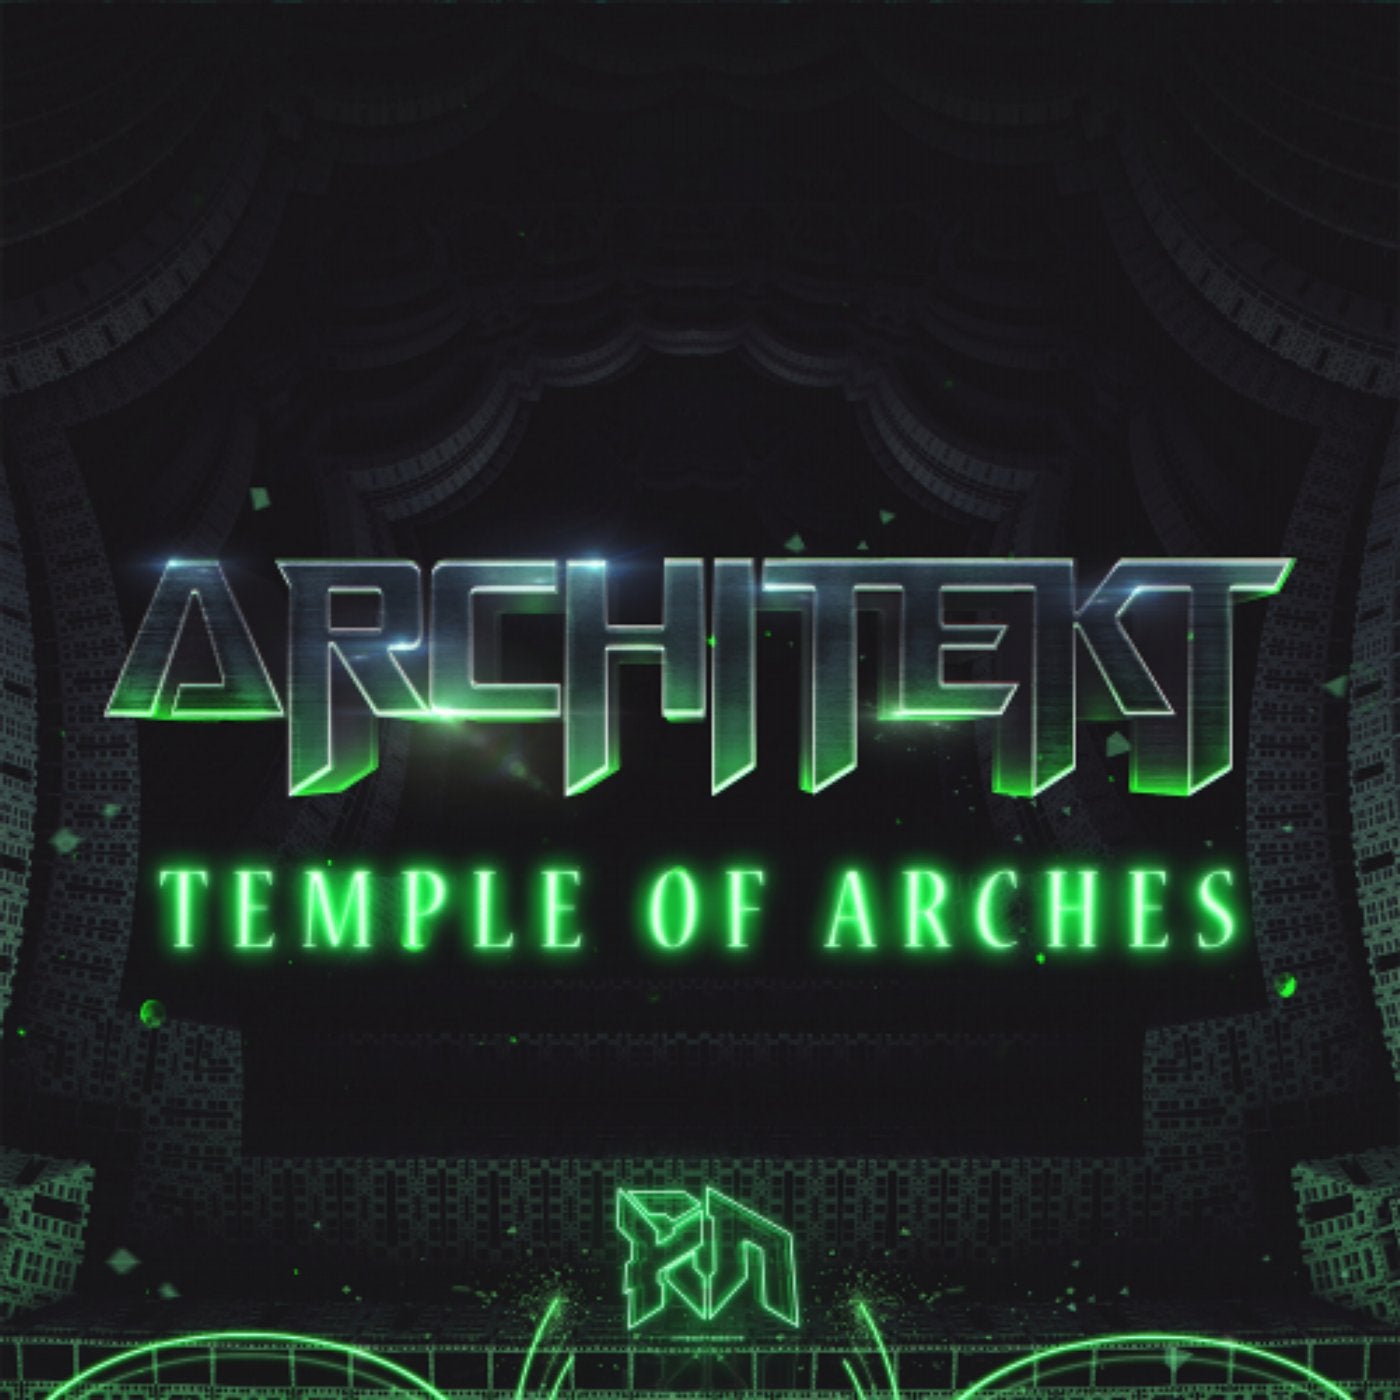 Temple of Arches